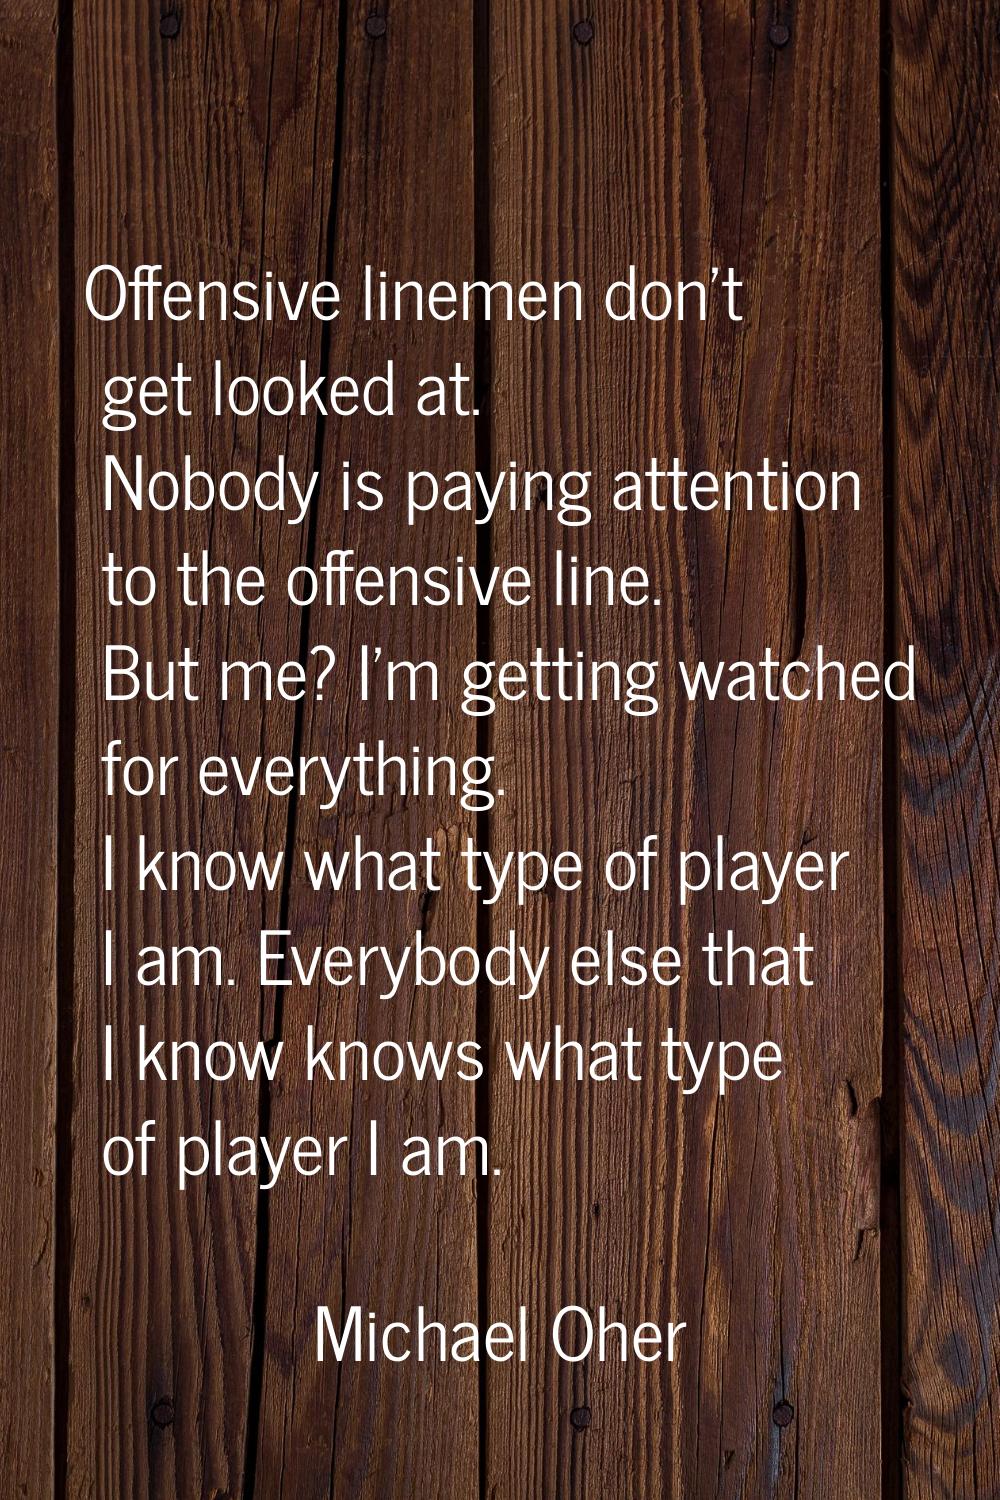 Offensive linemen don't get looked at. Nobody is paying attention to the offensive line. But me? I'